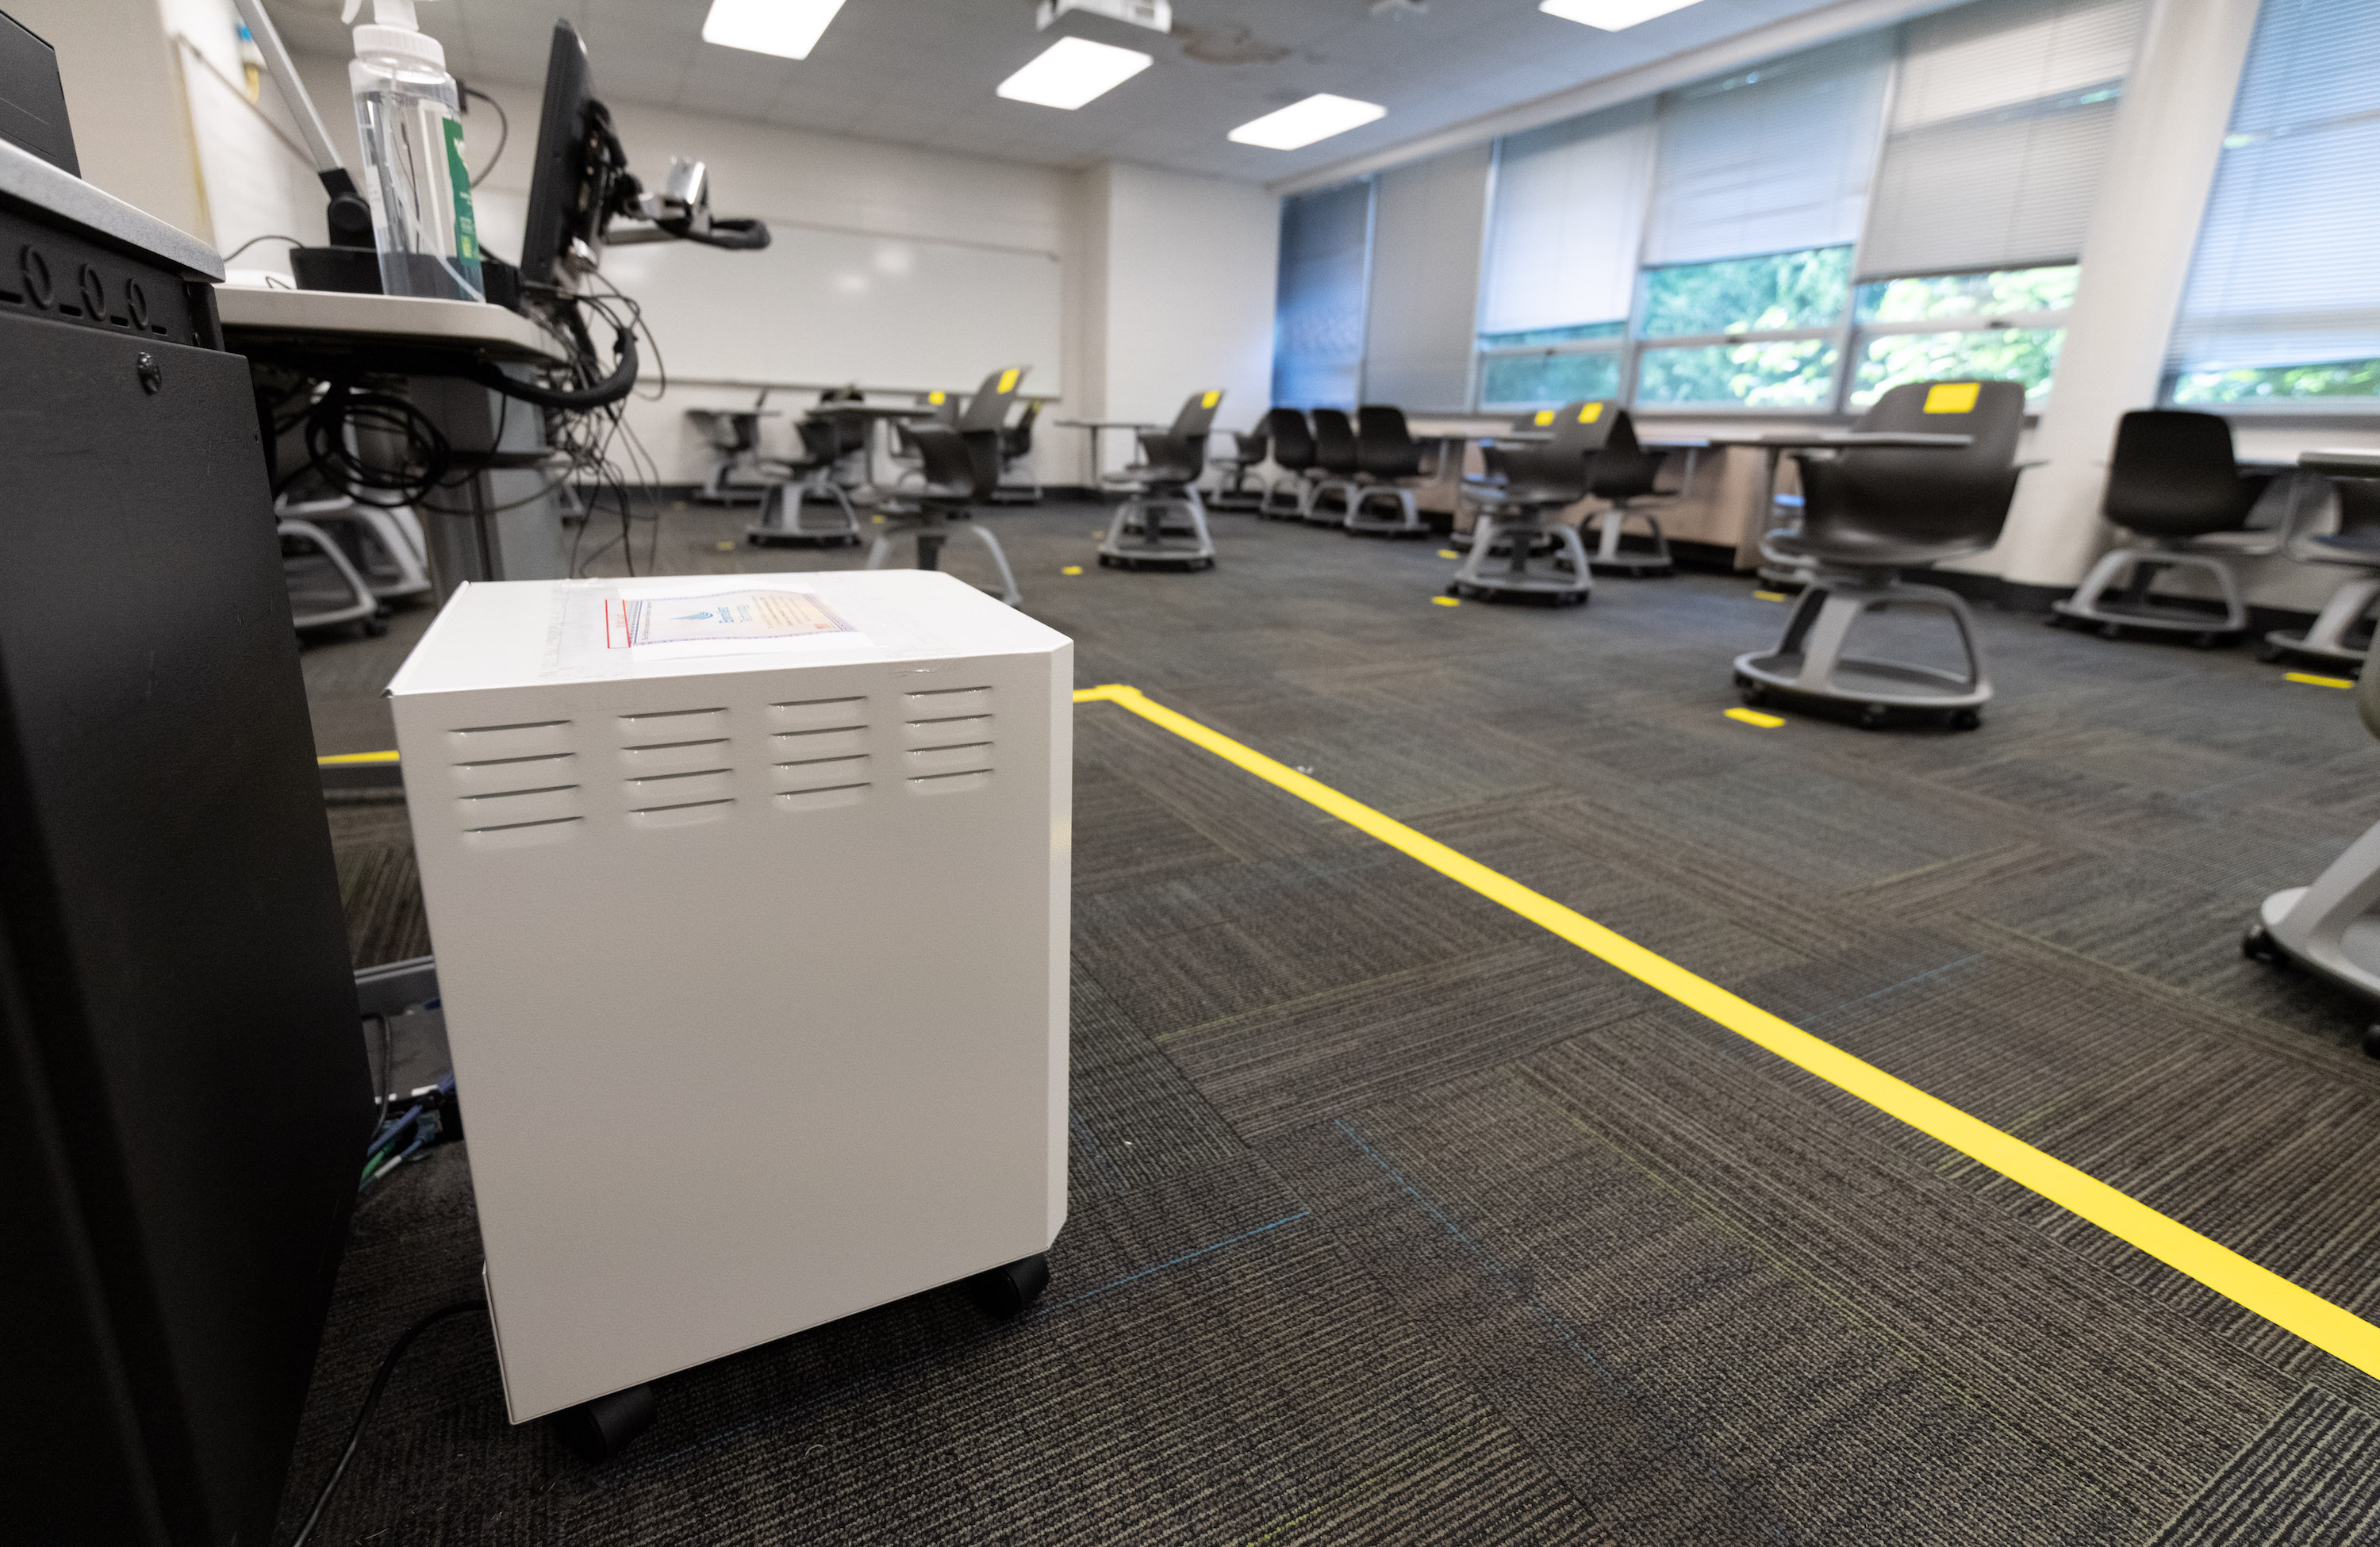 Air Purifiers in the Classroom